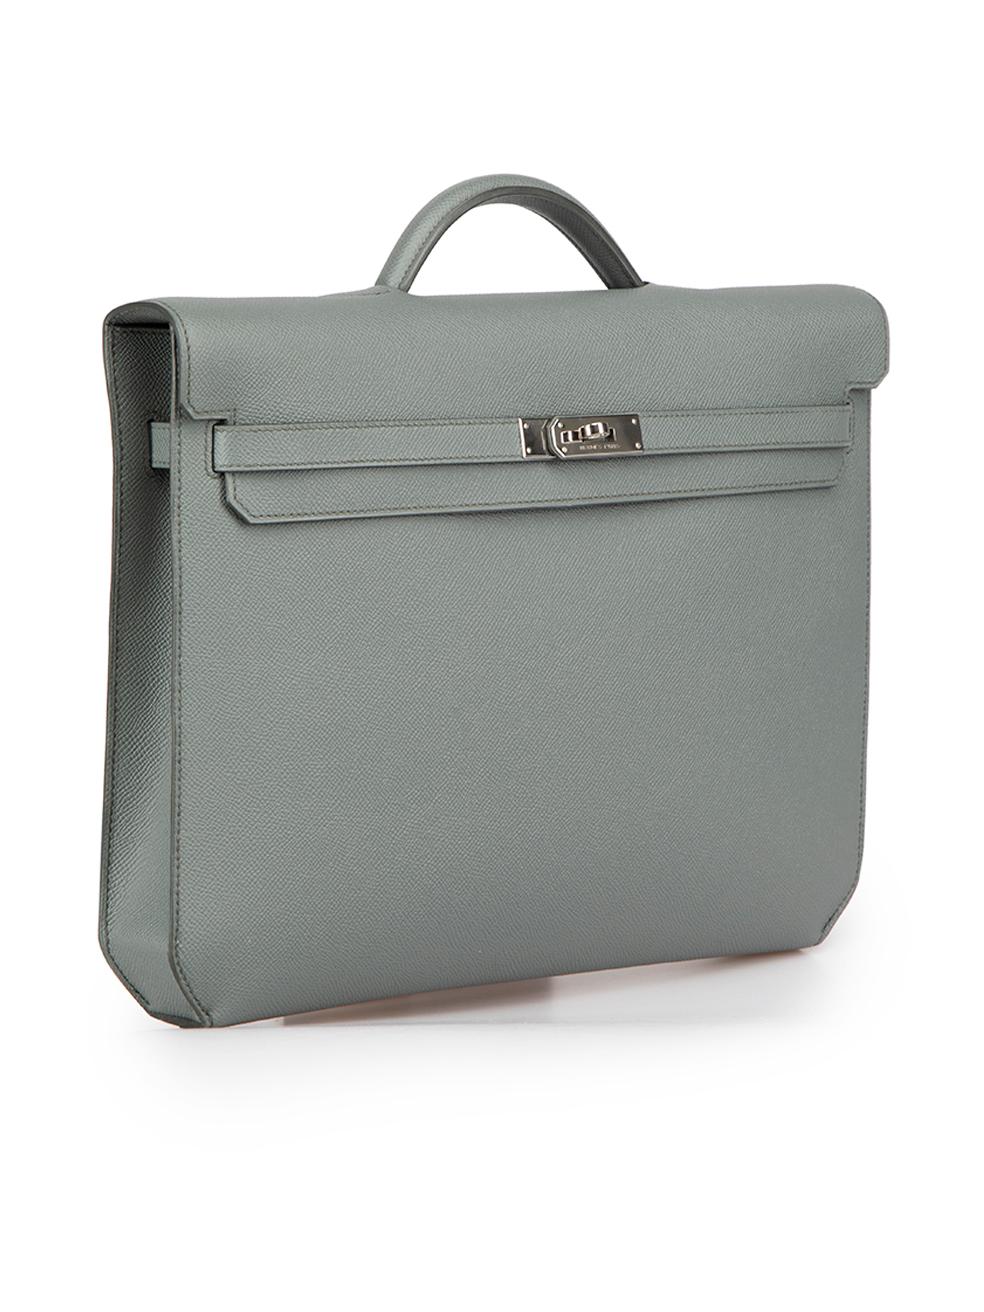 CONDITION is Very good. Minimal wear to briefcase is evident. Minimal wear to the front with very small mark on this used Hermès designer resale item. This item comes with original box and dust bag.

Details
2020
Kelly Depeches 36
Vert Amande
Epsom